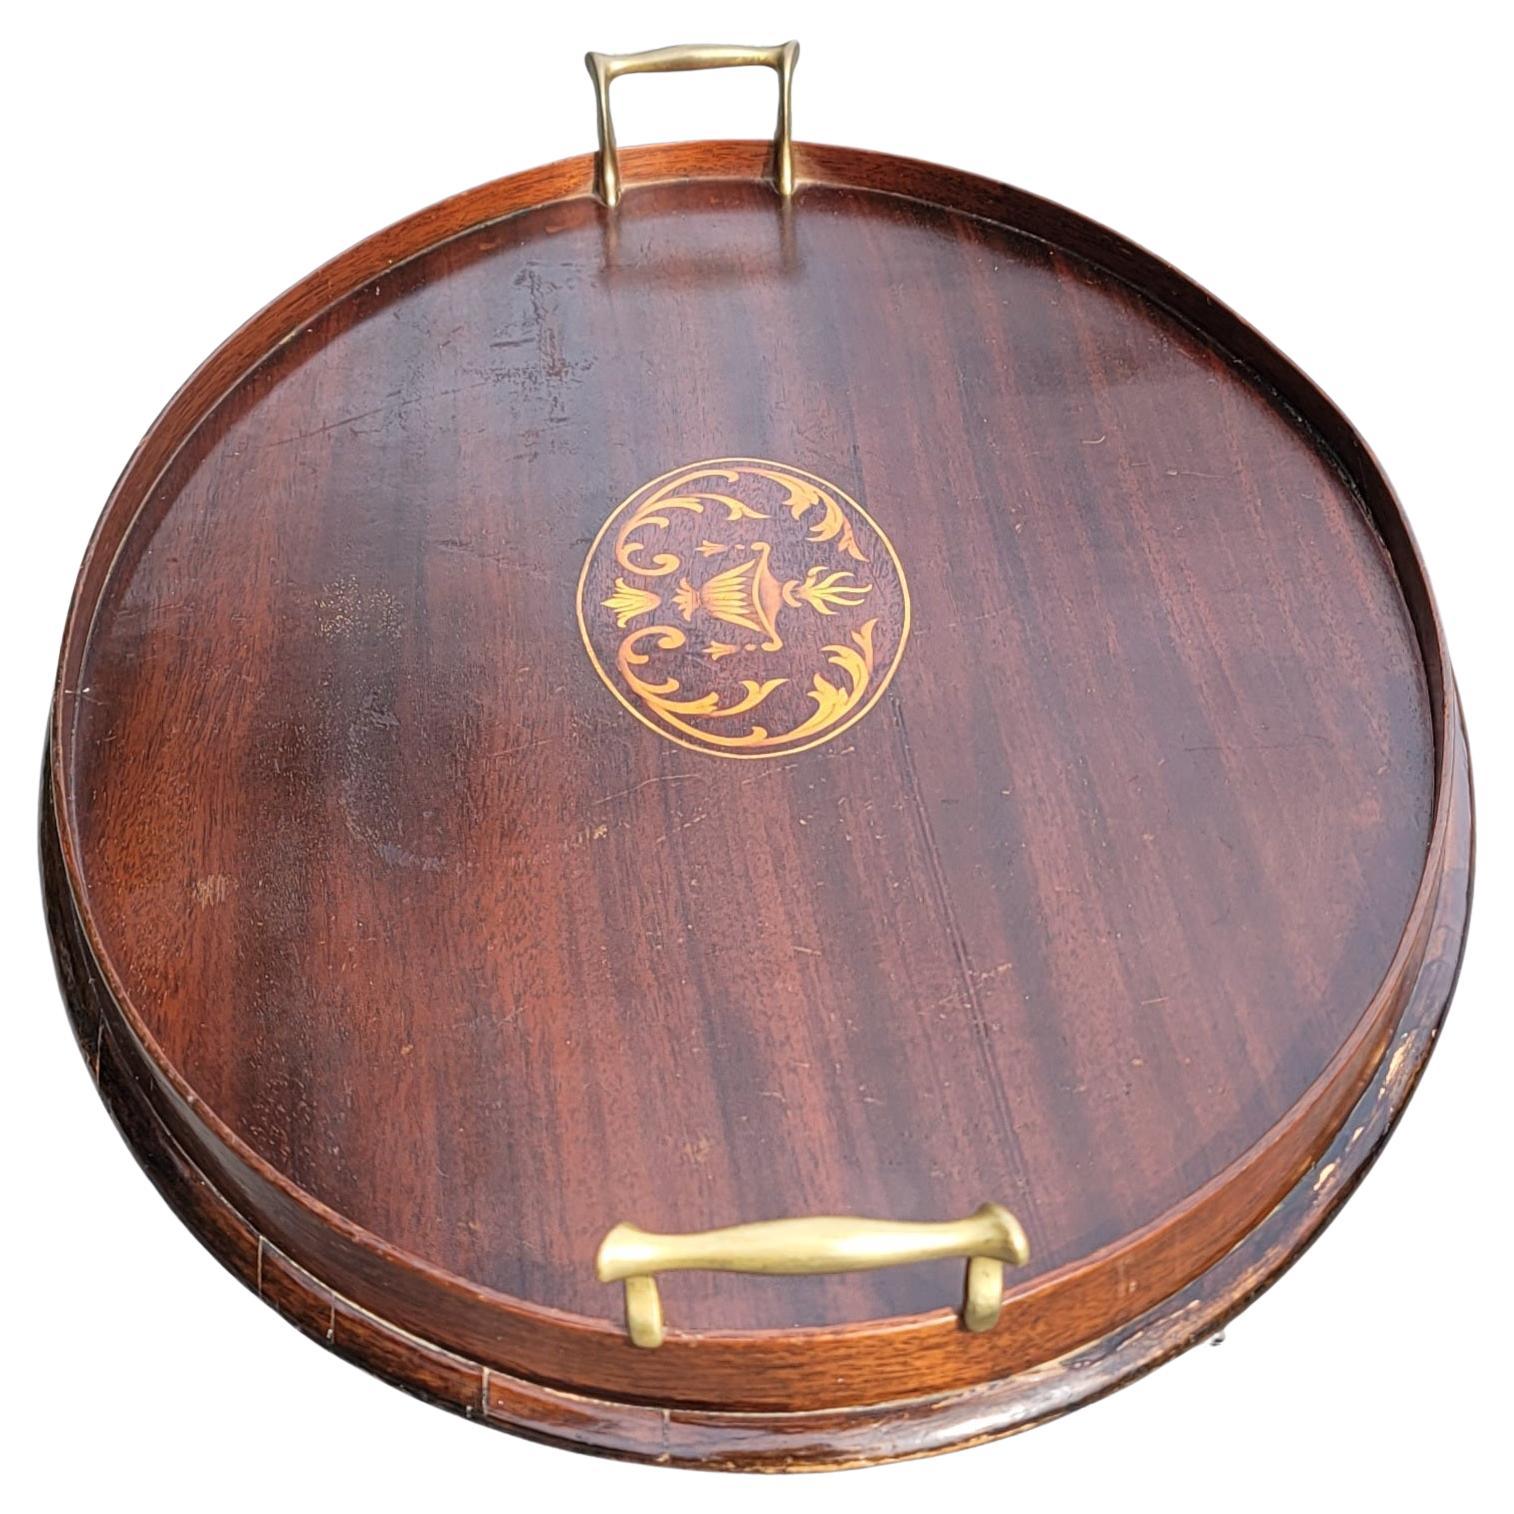 An English George III Mahogany Gallery and Inlay Serving tray with brass handles.
Measures 25